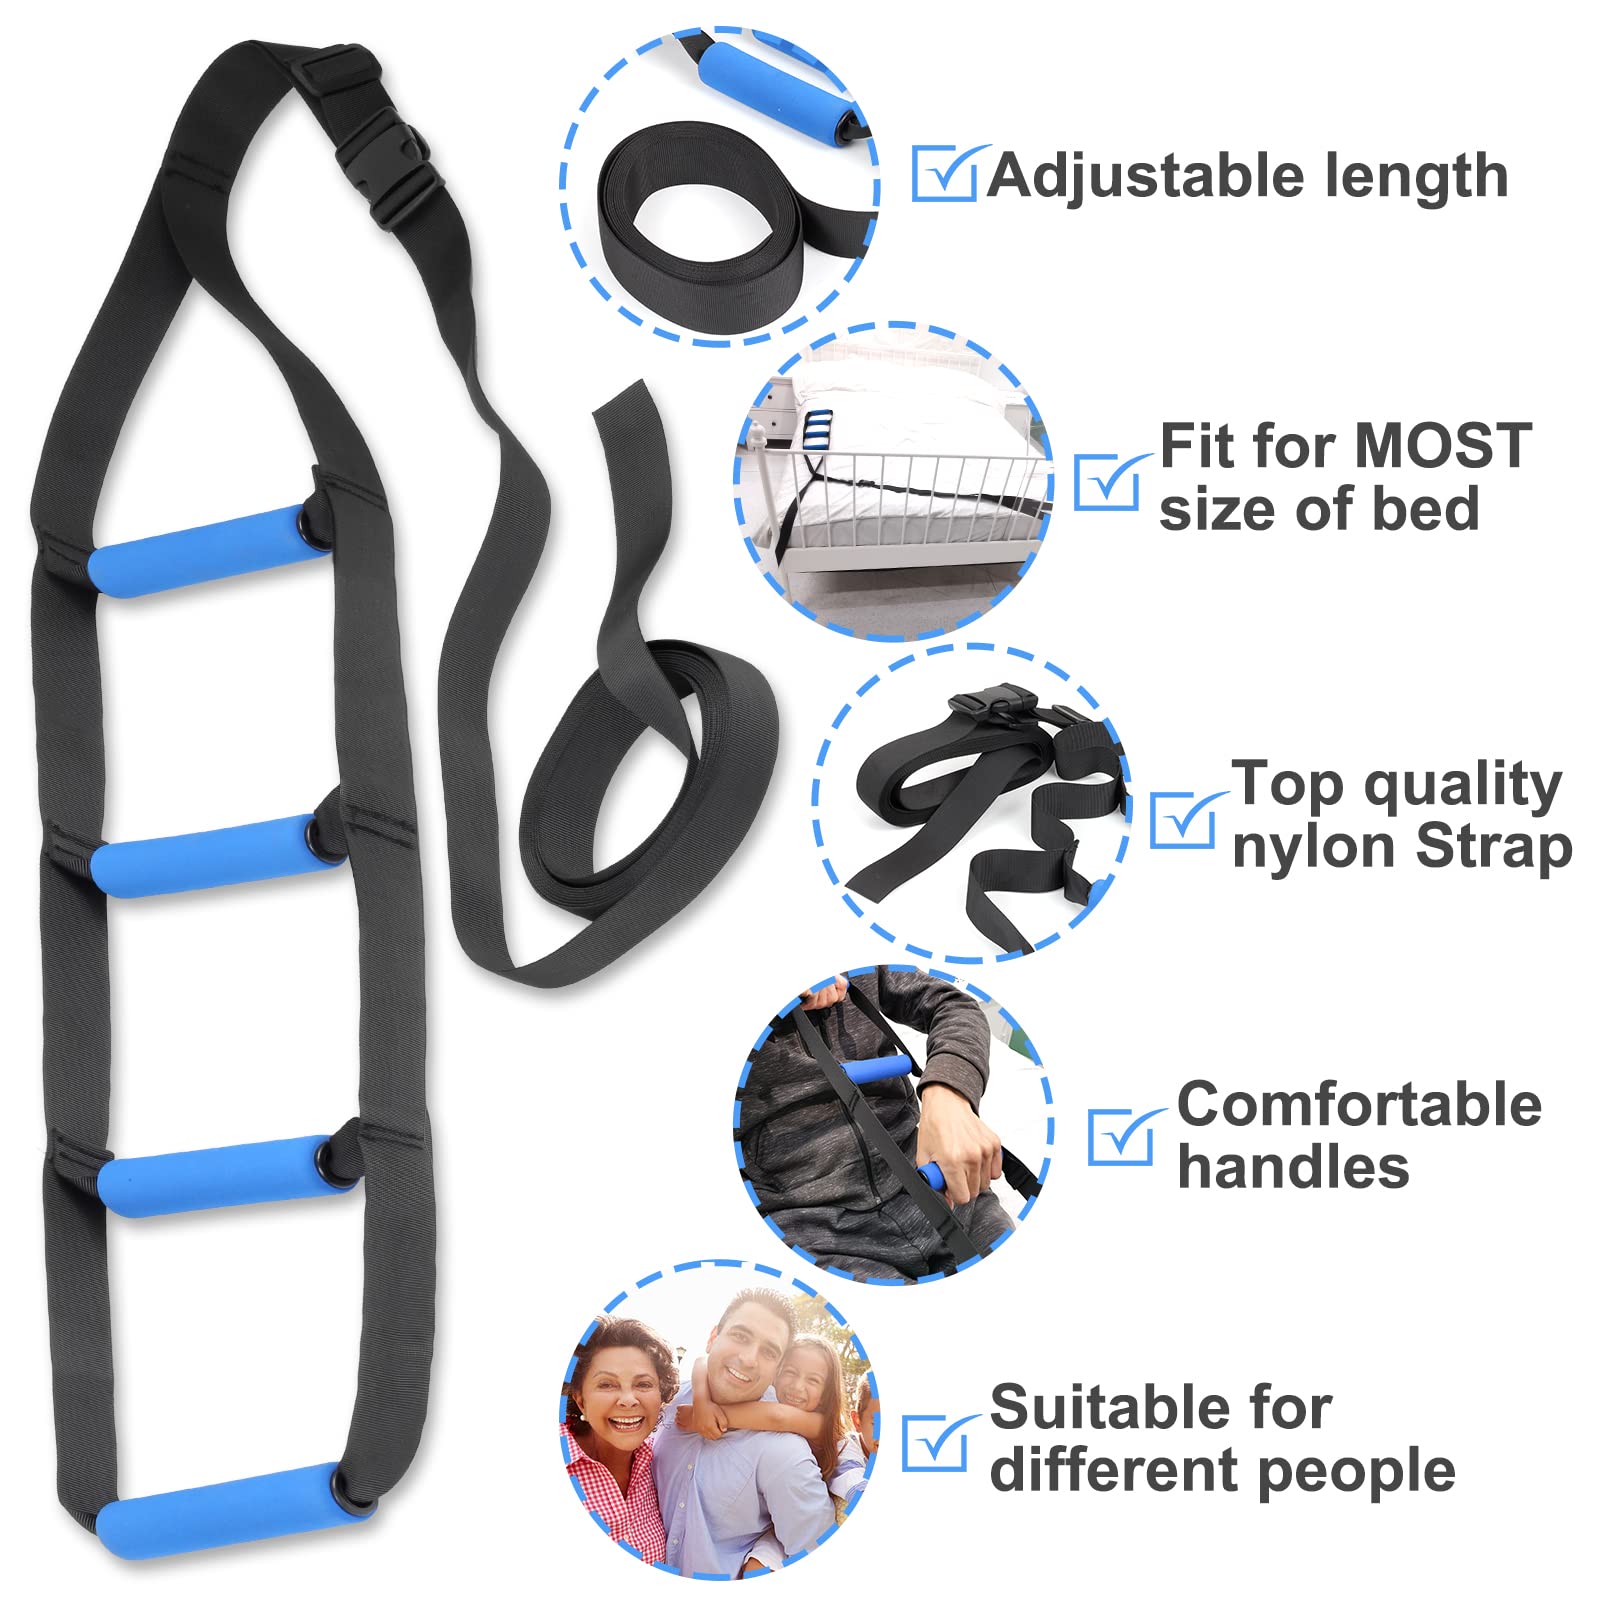 Homymusy Bed Ladder Assist,Pull up Helper and Sit up Helper with 4 Handle Grips (160 INCHES,1 Pack)